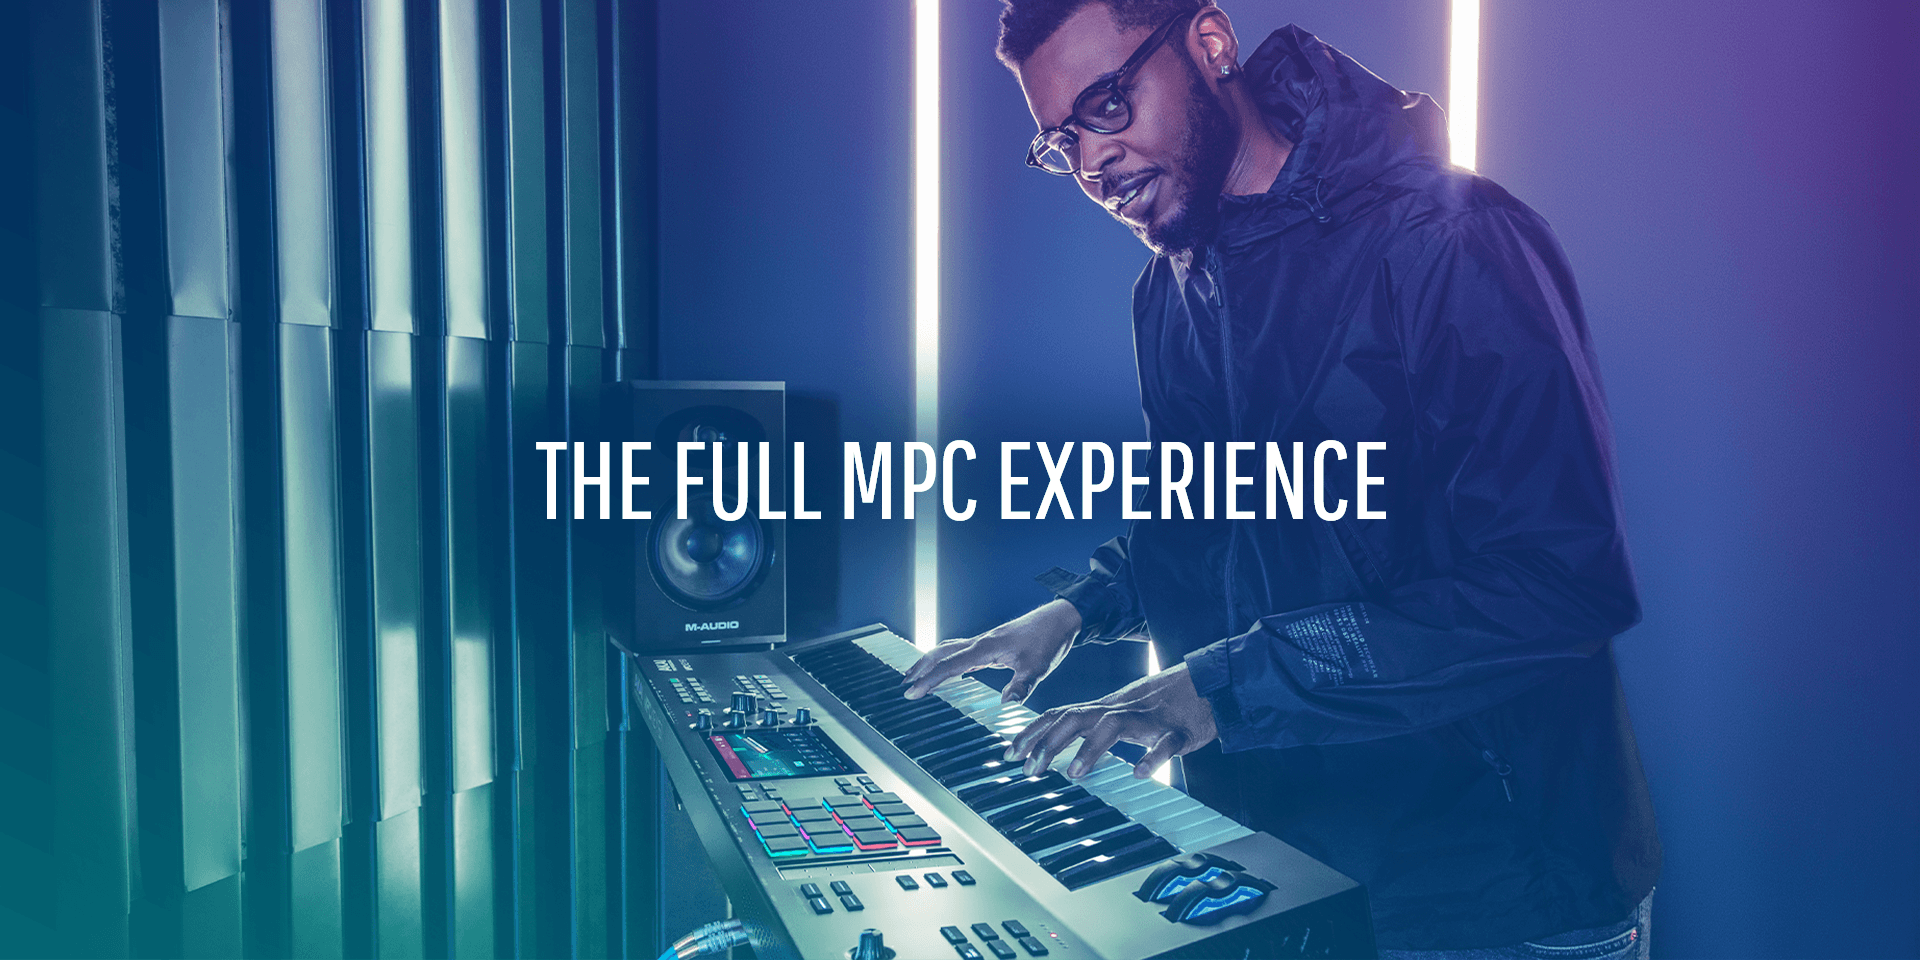 The Full MPC Experience